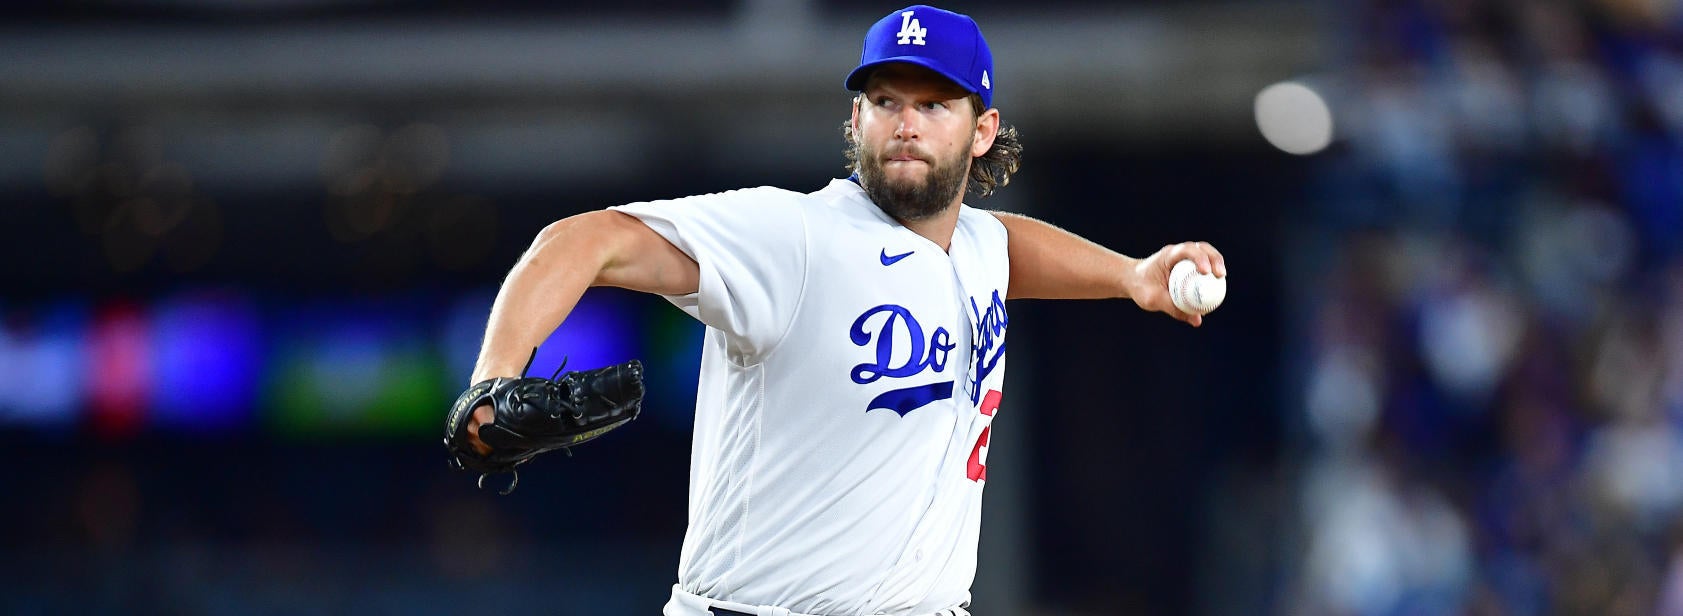 MLB odds, lines, picks: Advanced computer model includes the Dodgers in parlay for Tuesday, Sept. 5 that would pay well over 6-1